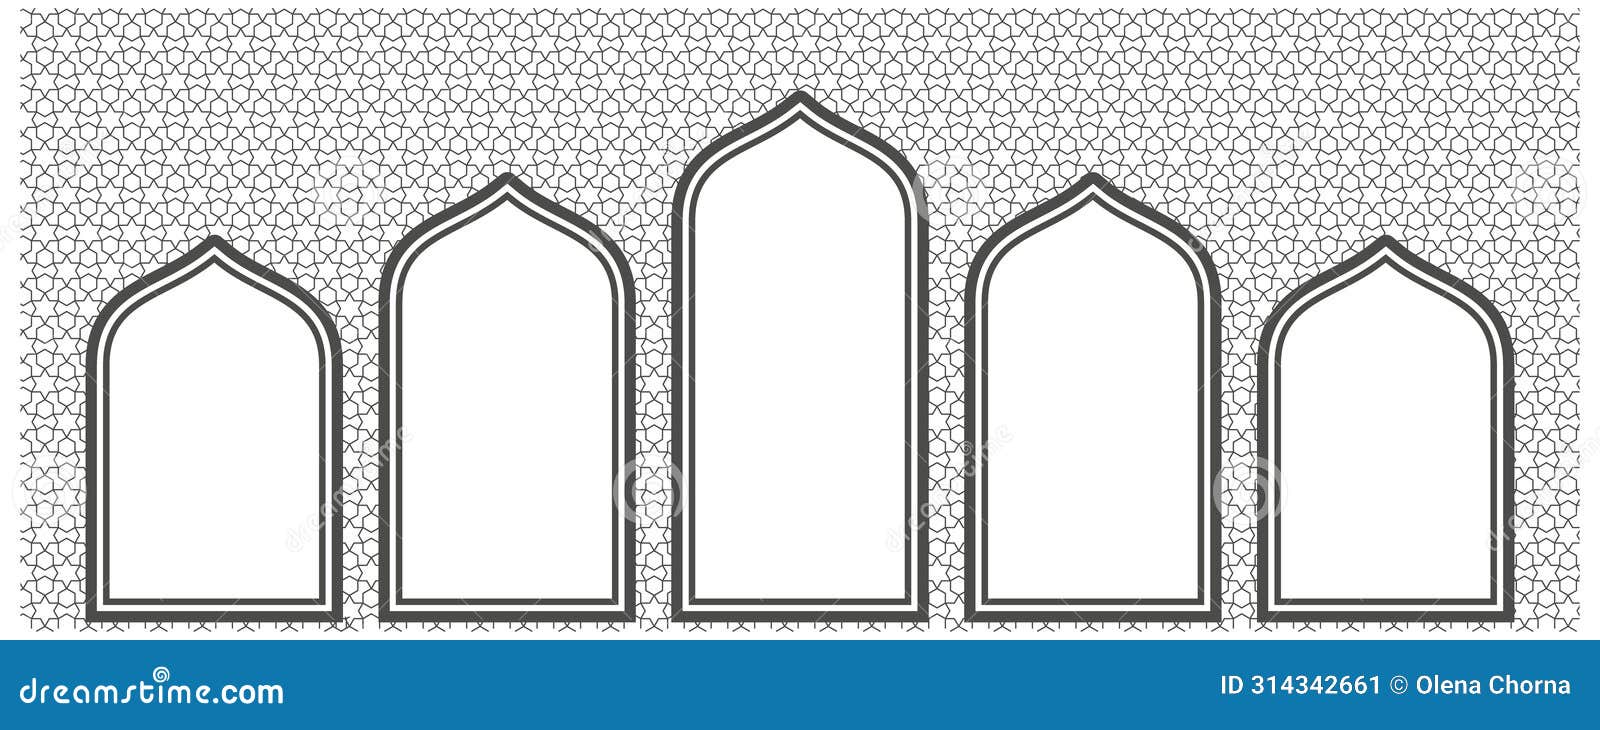 ramadan windows on pattern wall. doors and arches in arabic mosque. arabesque ornament on white background. interior